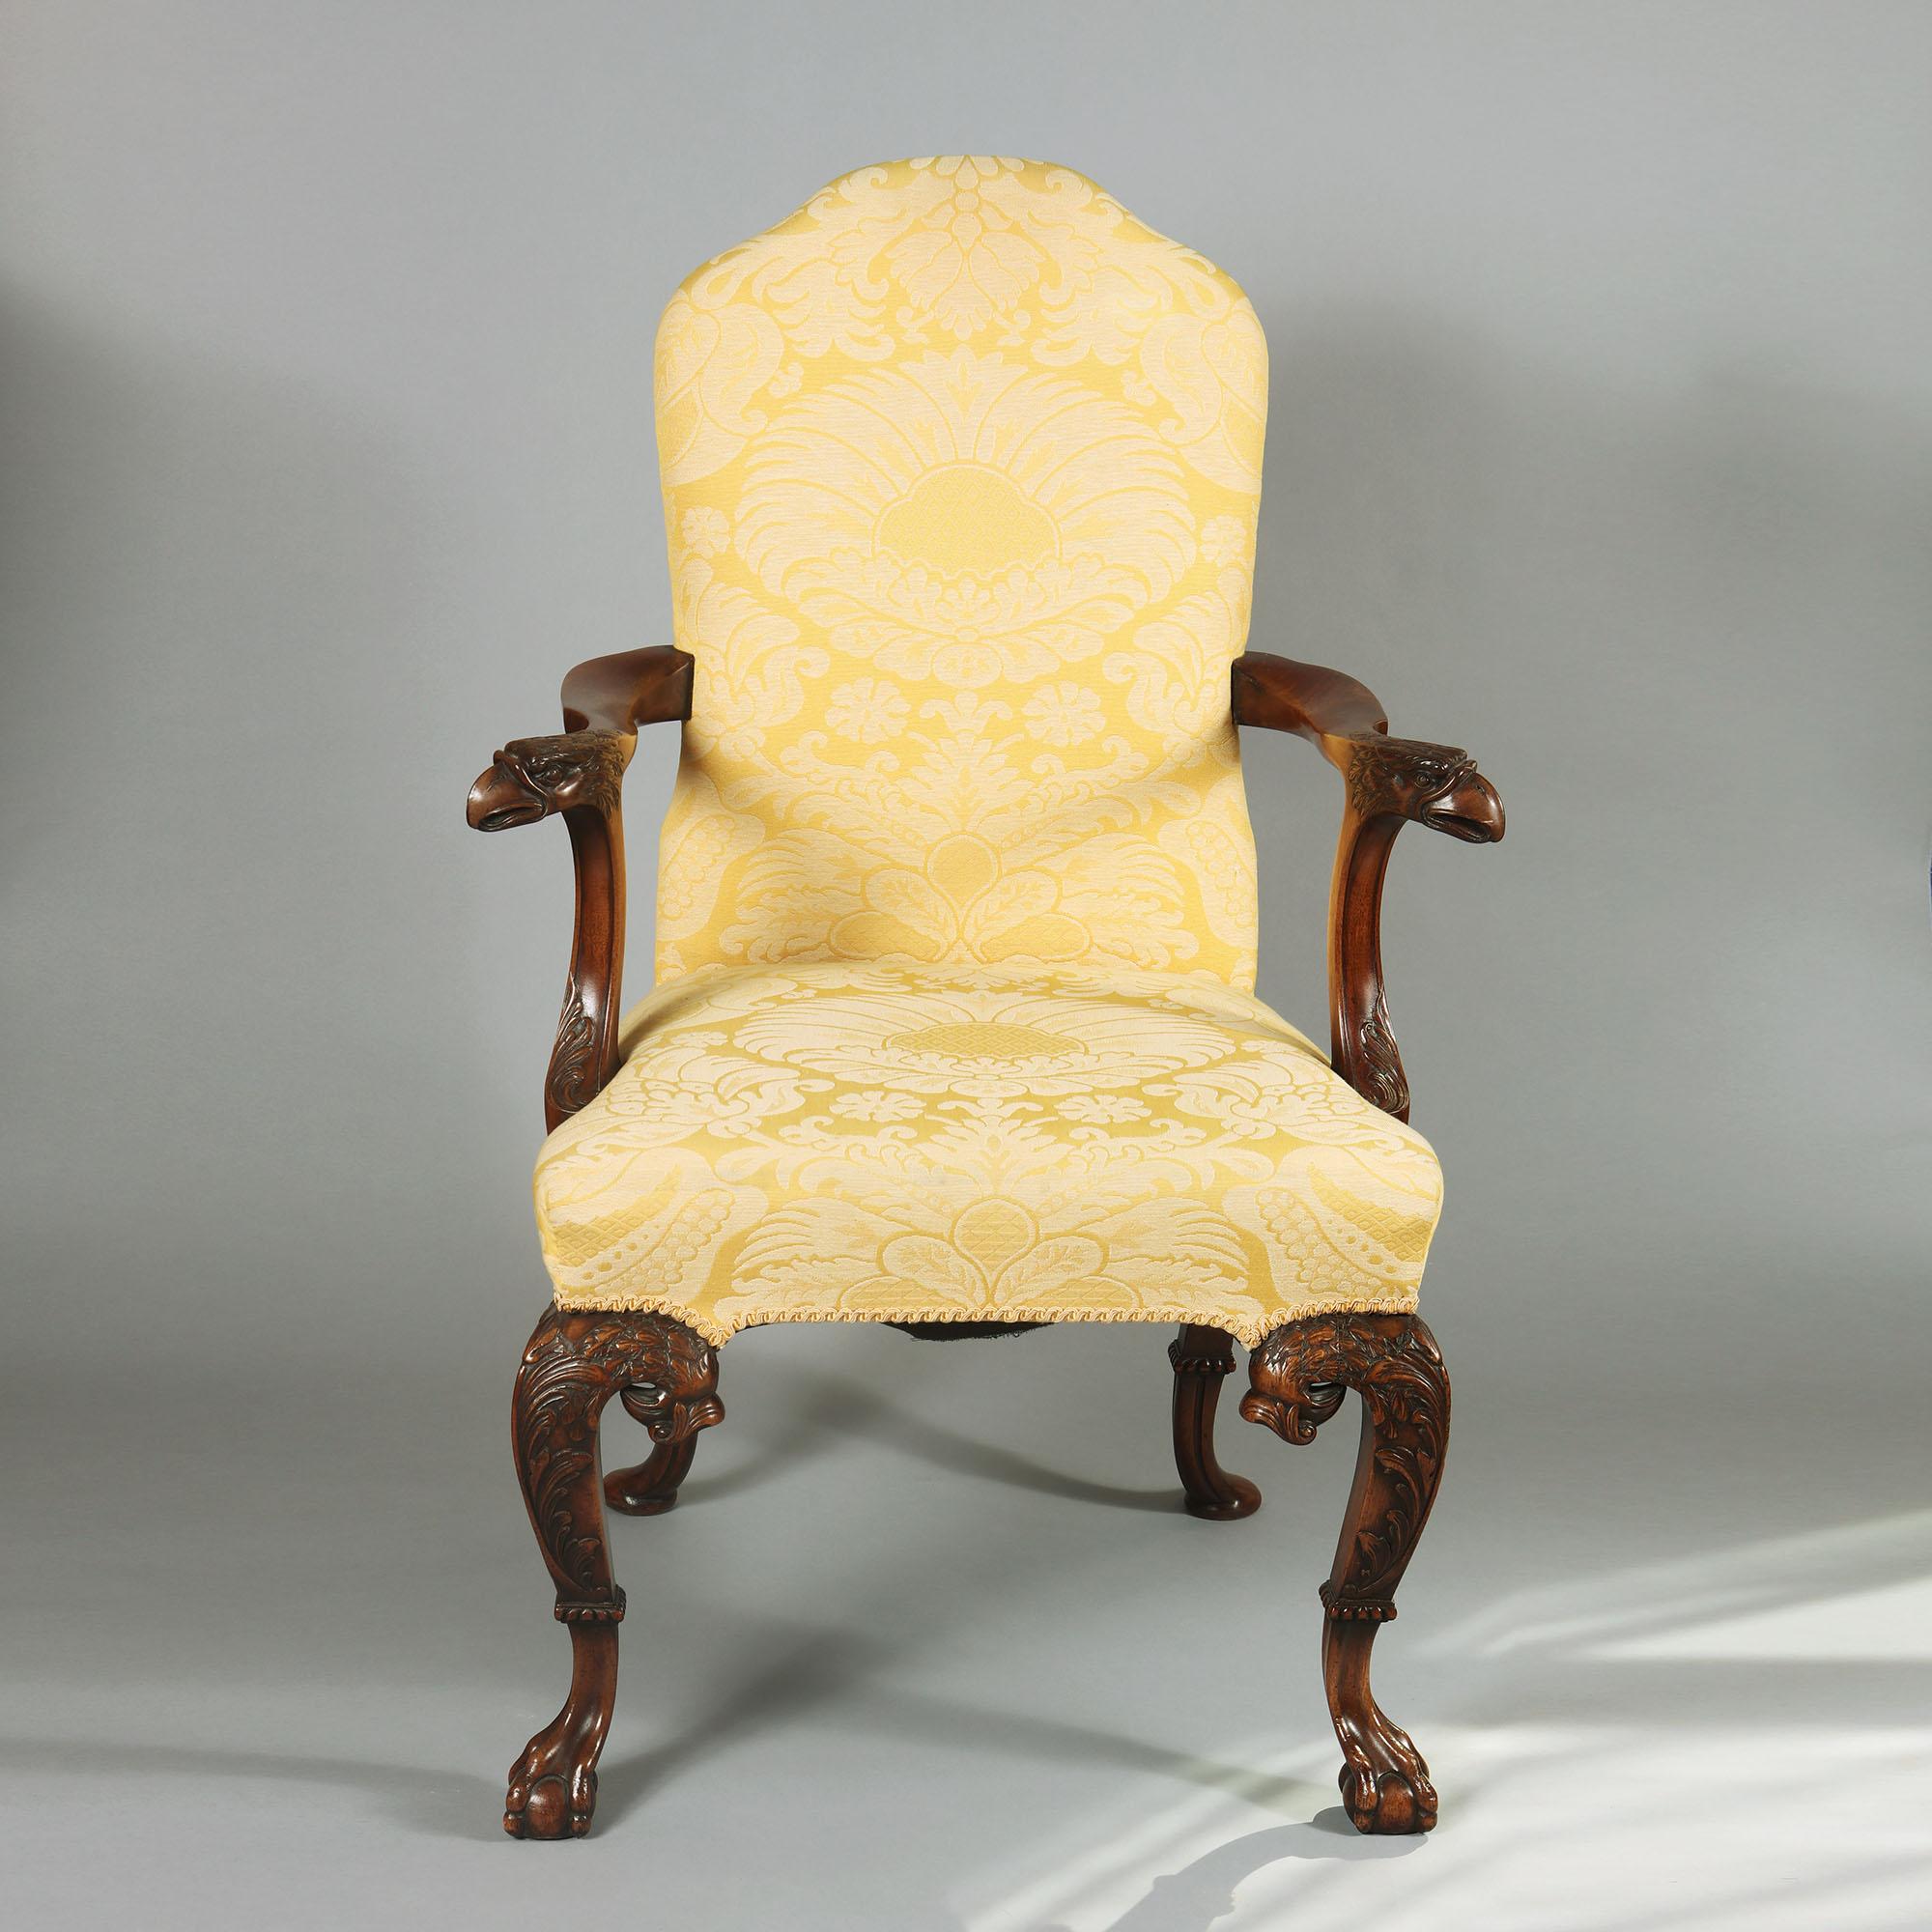 A mahogany open armchair in George I manner, with scroll carving of real style and panache having fine eagle head terminals to each arm, with distinctive scroll and feather work to the hipped cabriole legs above excellent collared ball and claw